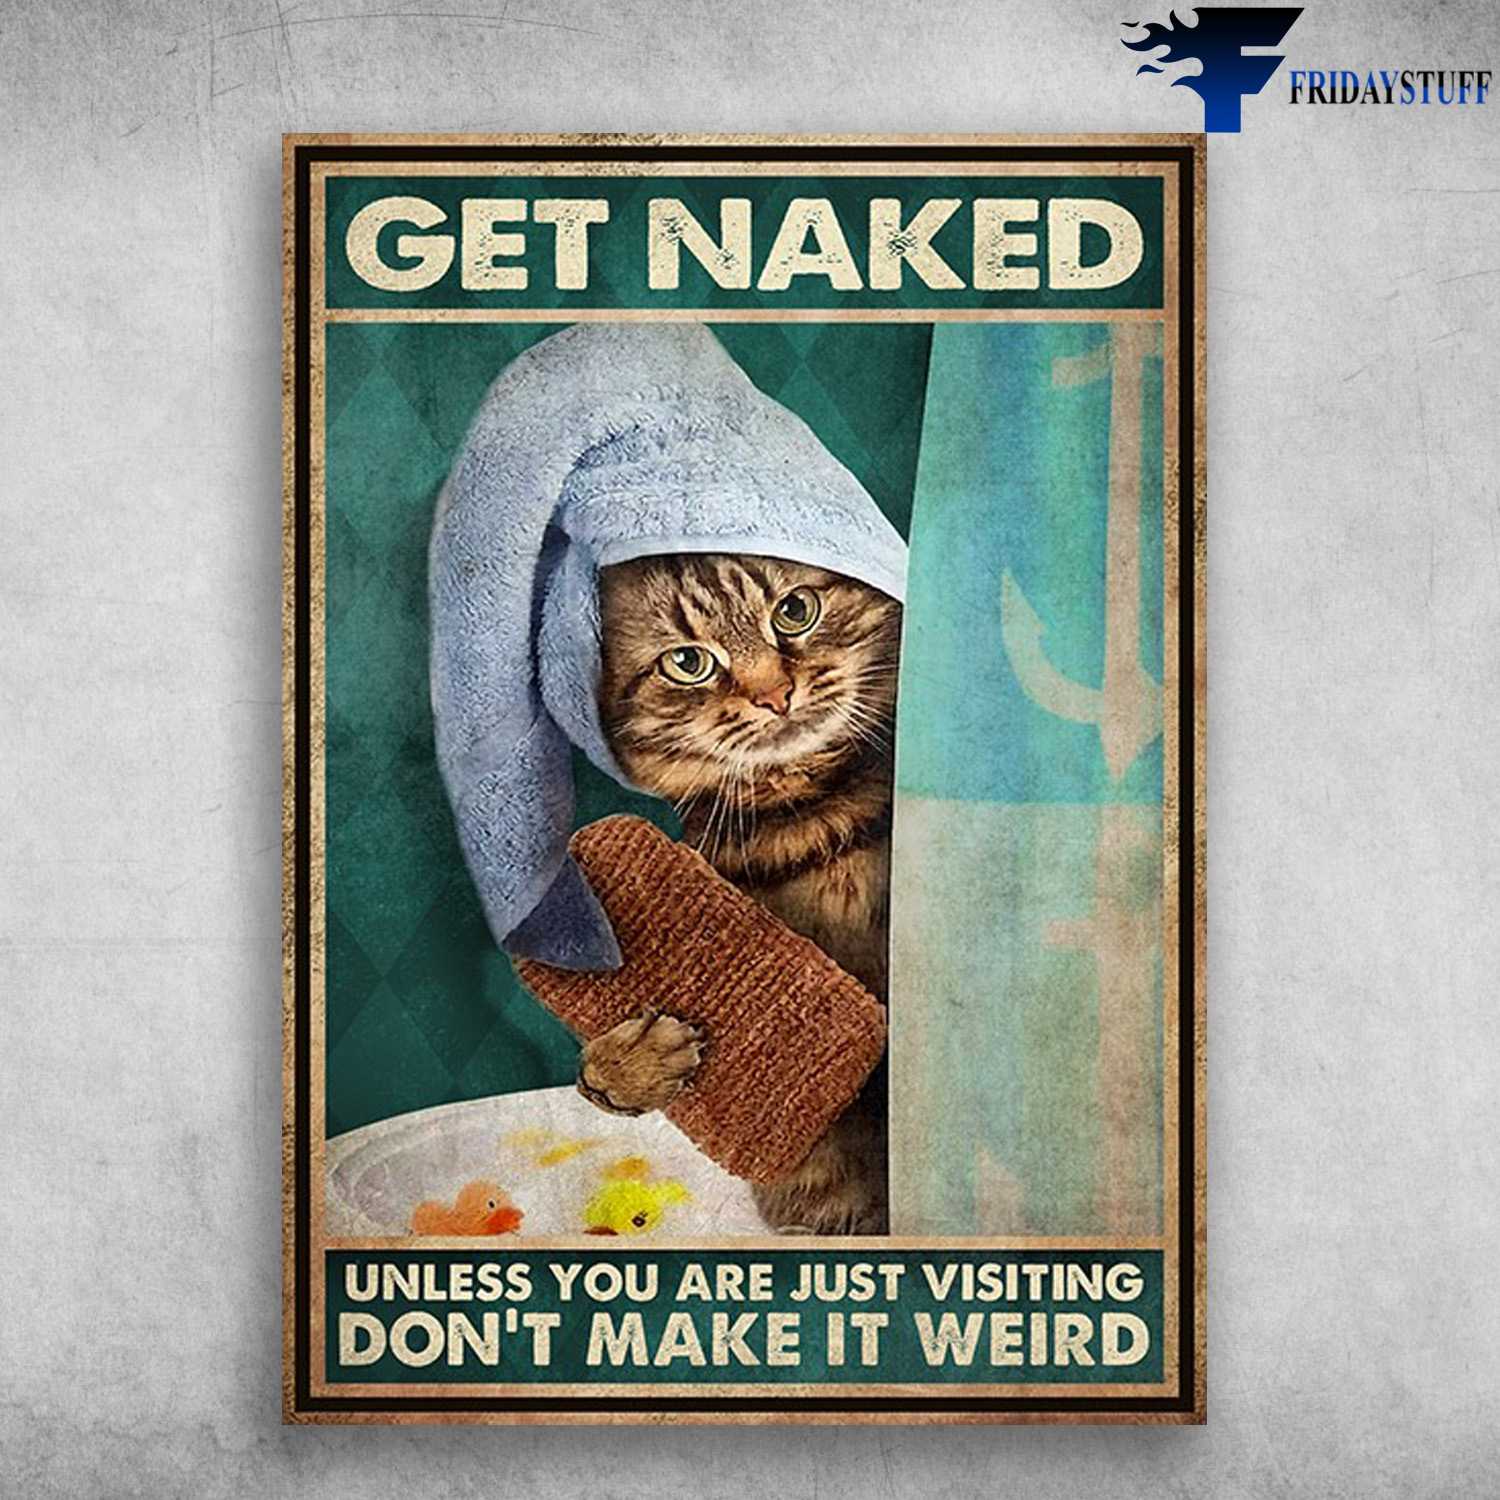 Bath Cat - Get Naked, Unless You Are Just Visiting, Don't Make It Weird